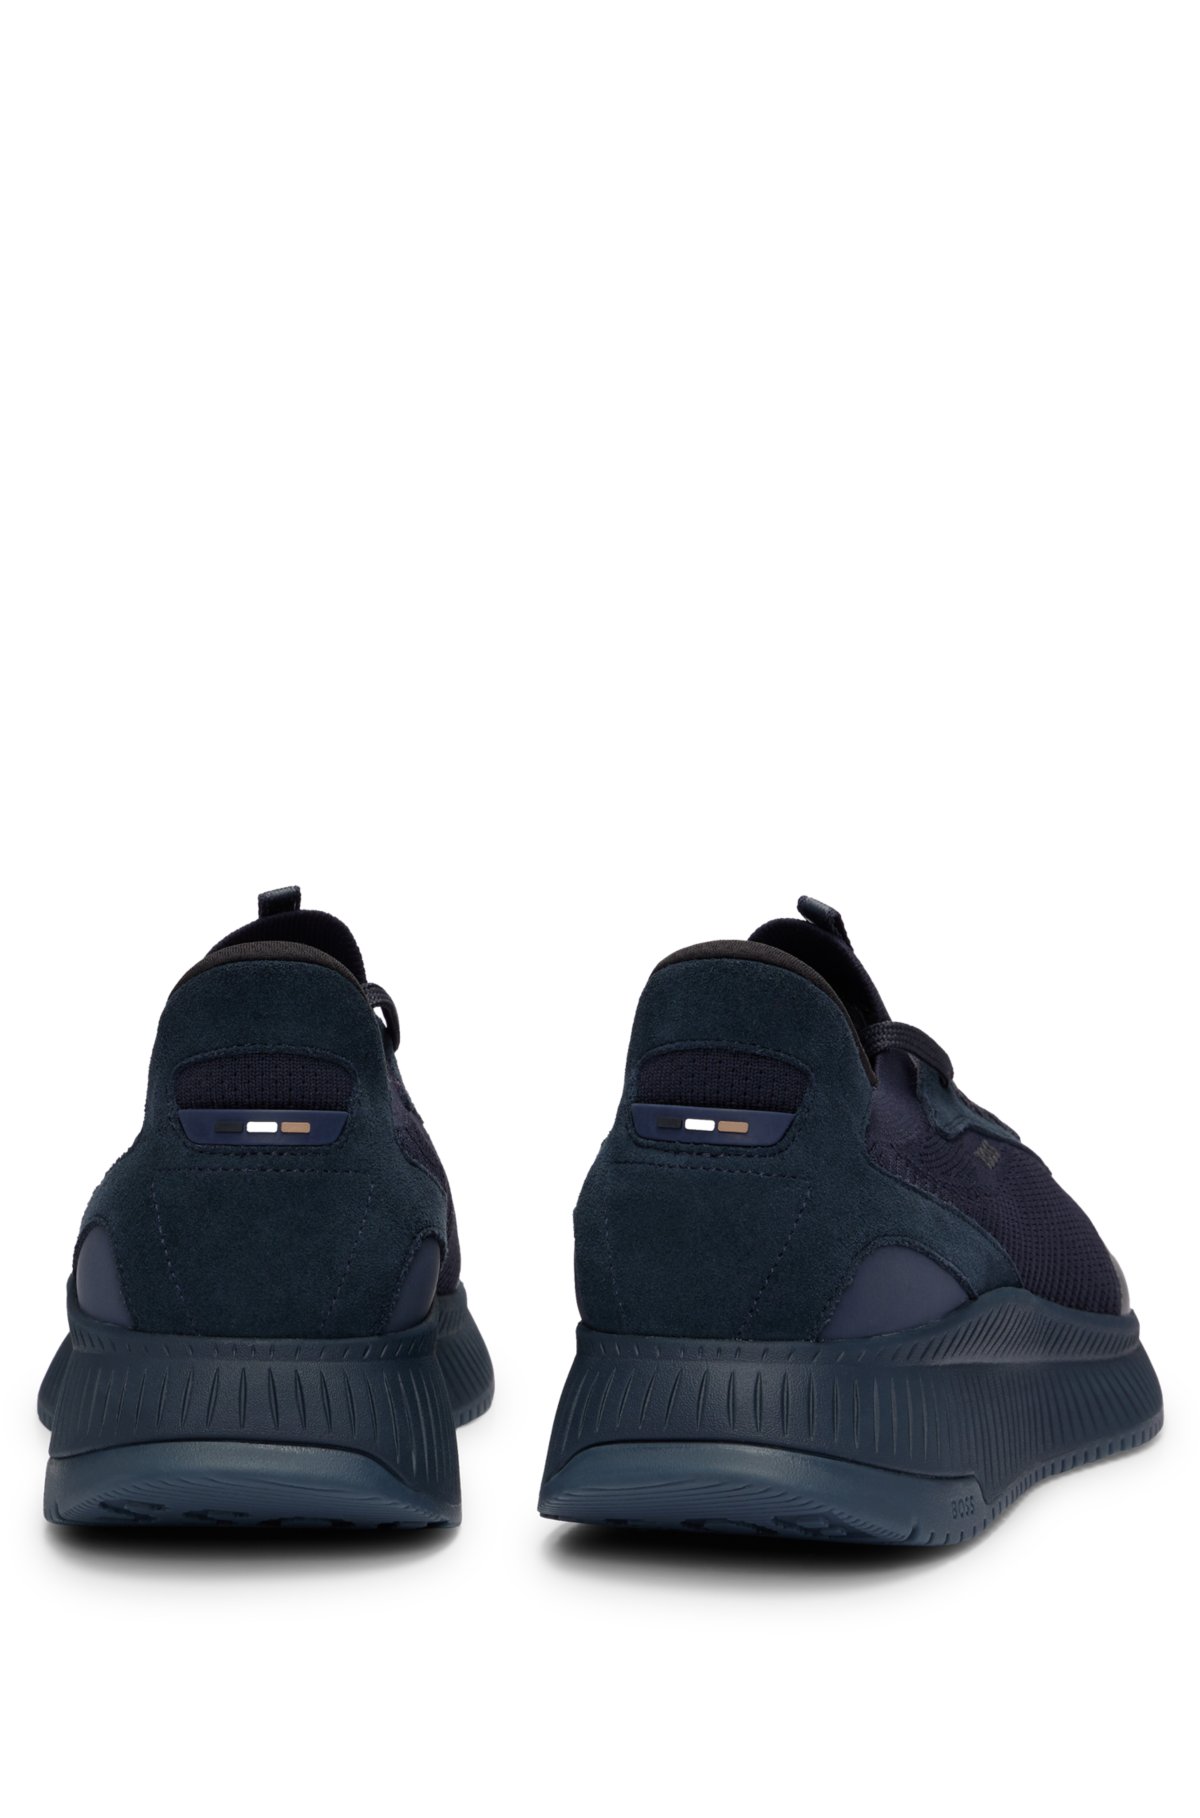 TTNM EVO trainers with knitted upper, Dark Blue